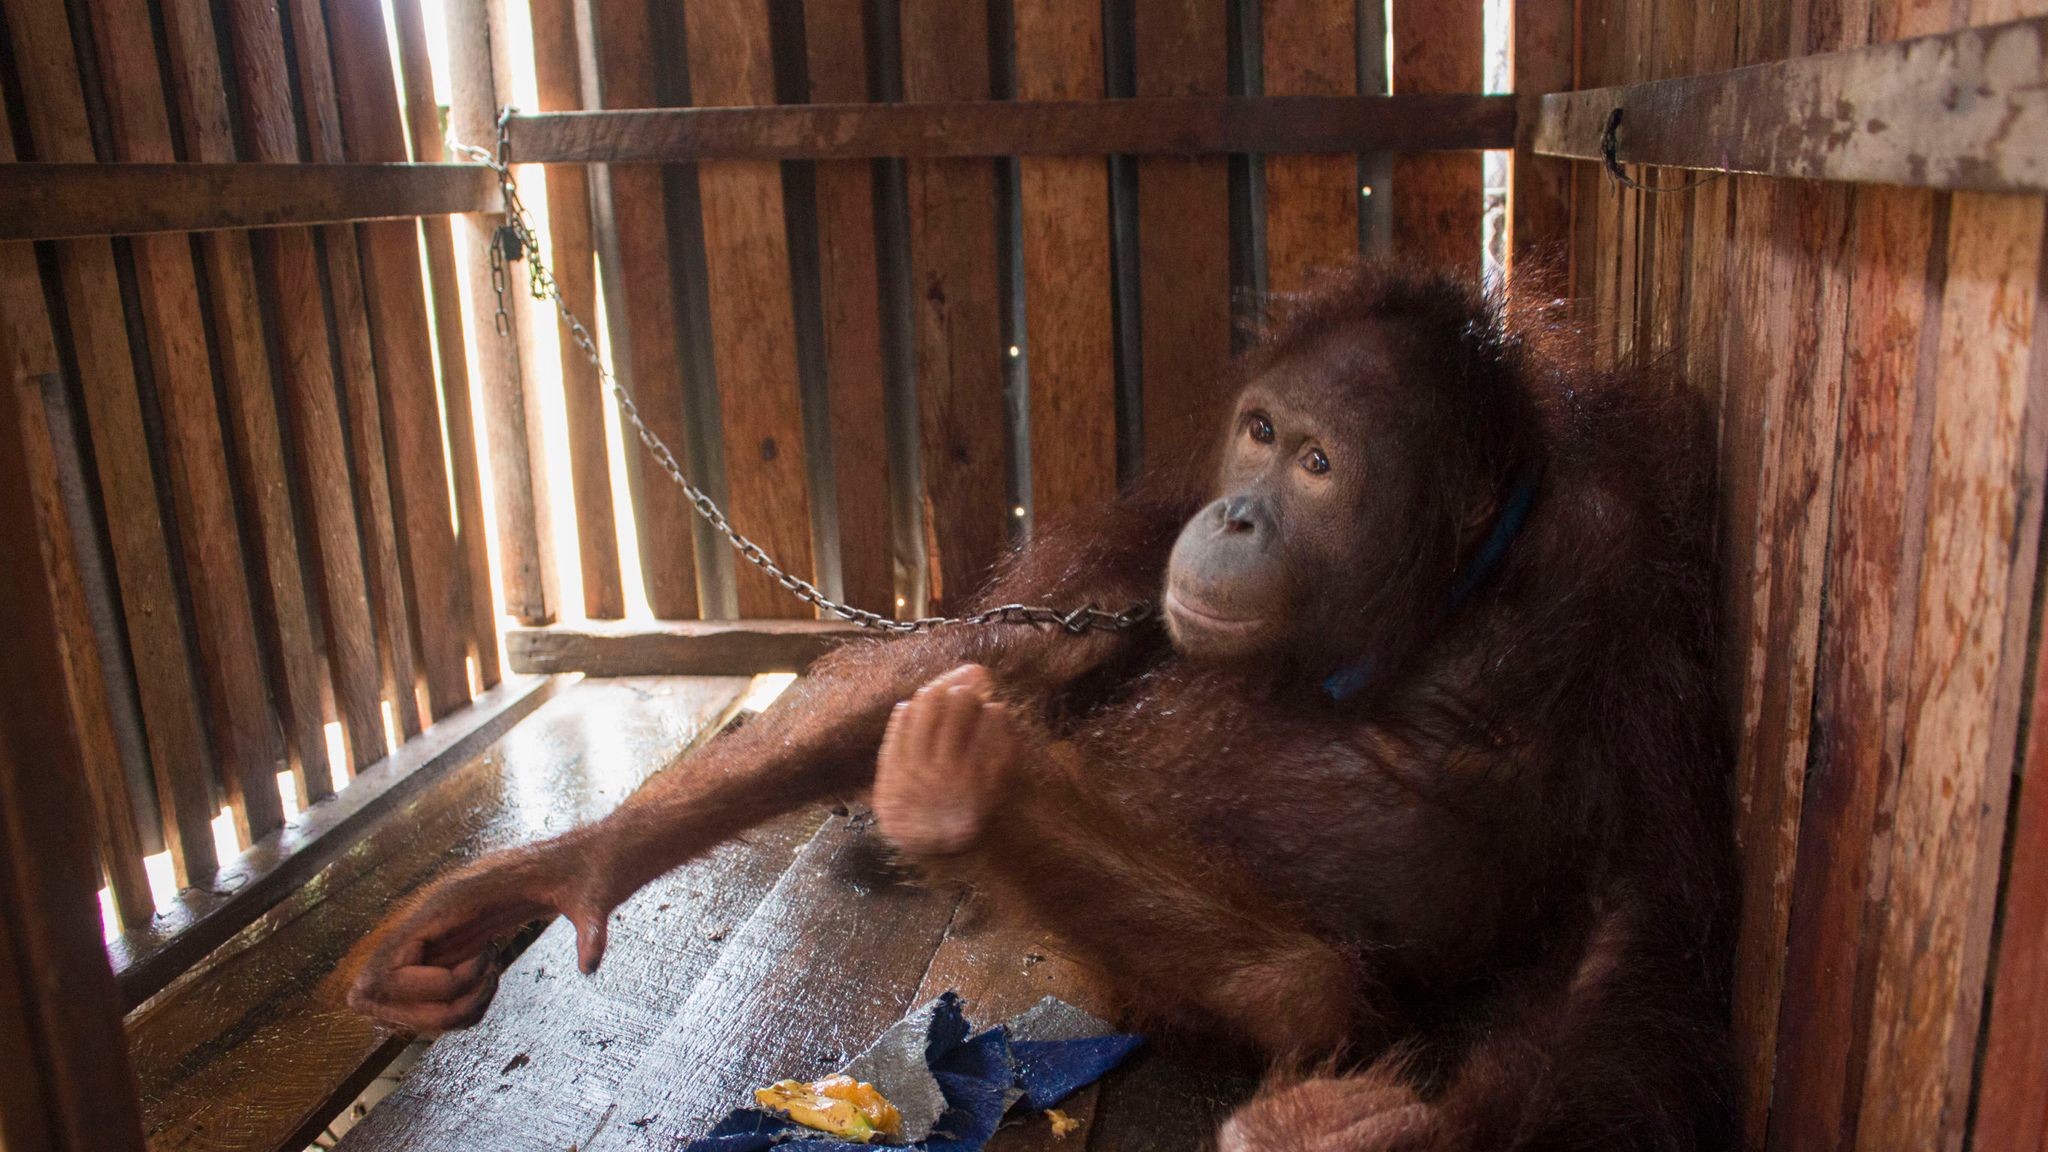 Chained orangutan held captive in Borneo enjoys new freedom after rescue |  World News | Sky News